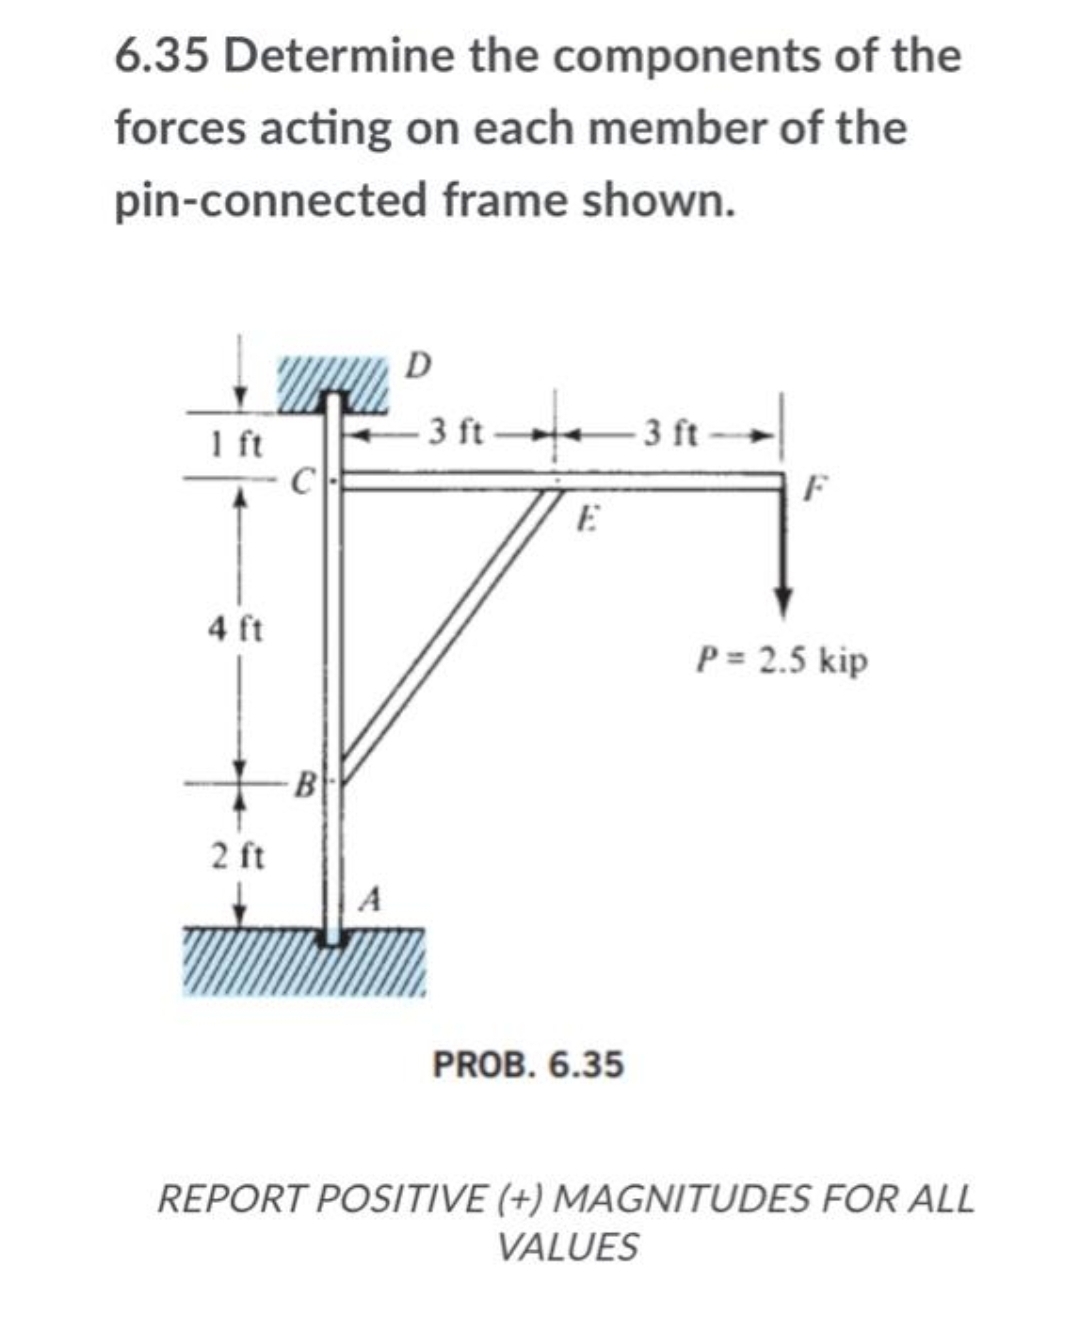 6.35 Determine the components of the
forces acting on each member of the
pin-connected frame shown.
D
1 ft
C
3 ft –3 ft
F
E
4 ft
P = 2.5 kip
-B
2 ft
A
PROB. 6.35
REPORT POSITIVE (+) MAGNITUDES FOR ALL
VALUES
